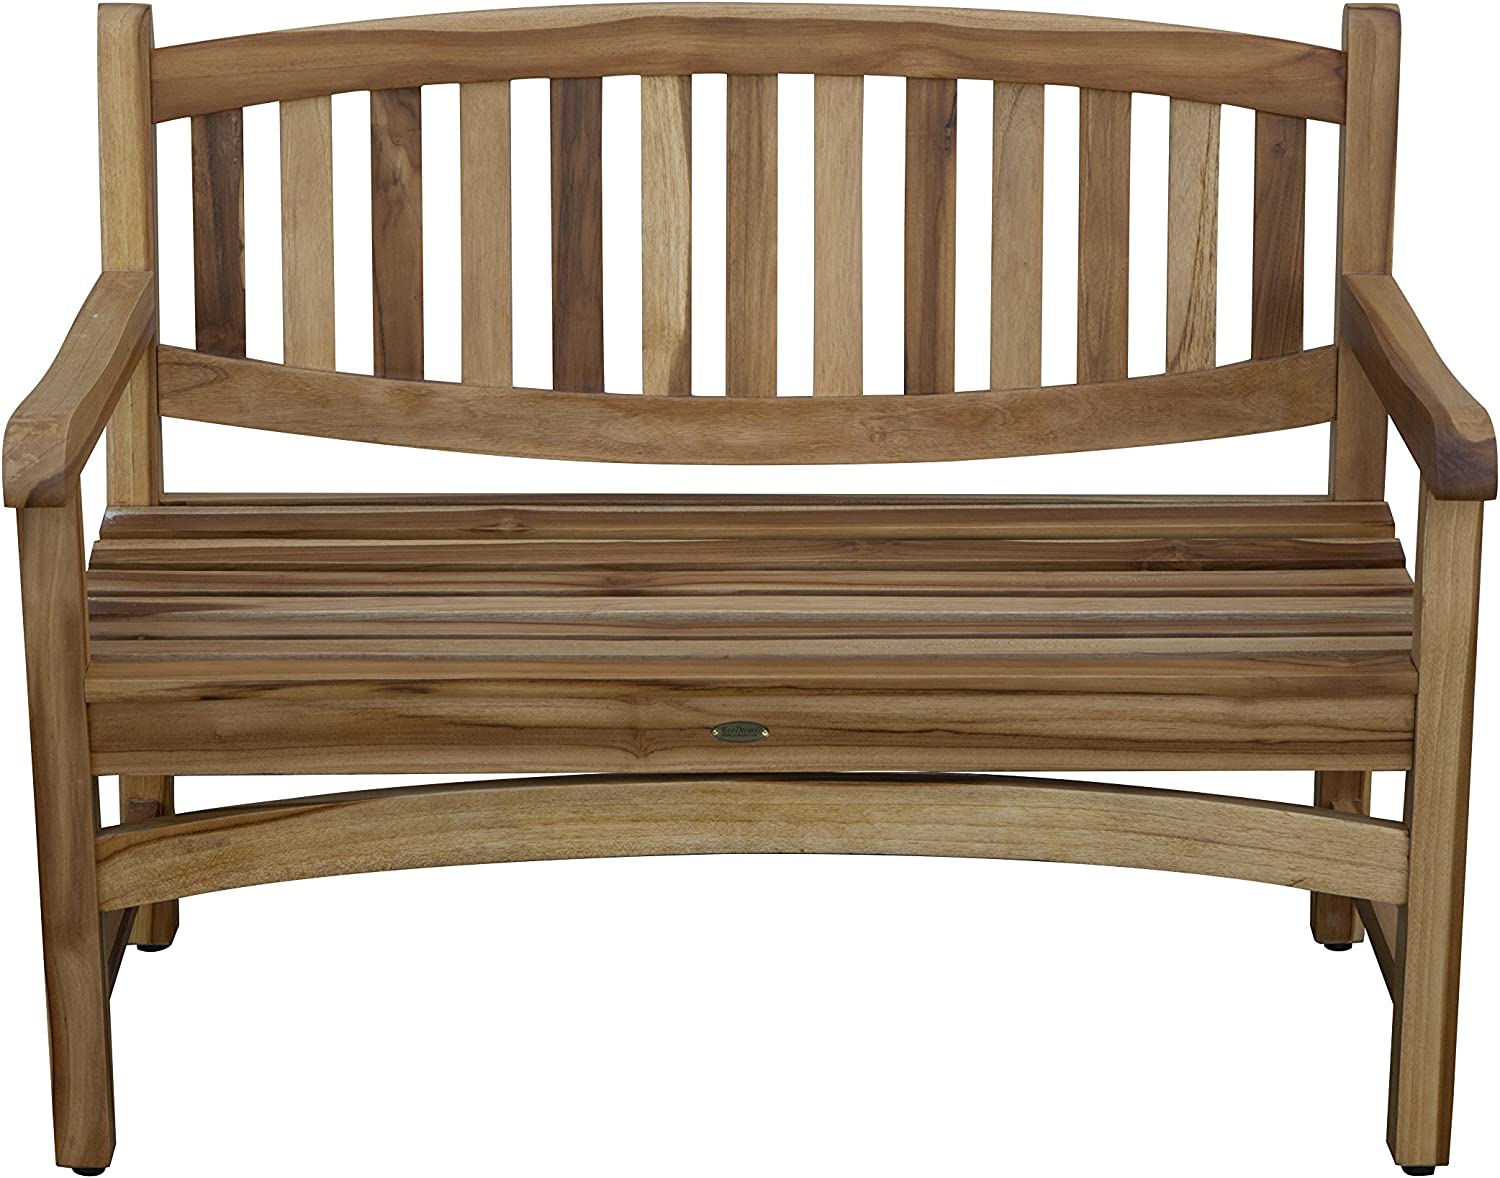 outdoor bench ideas for the front porch